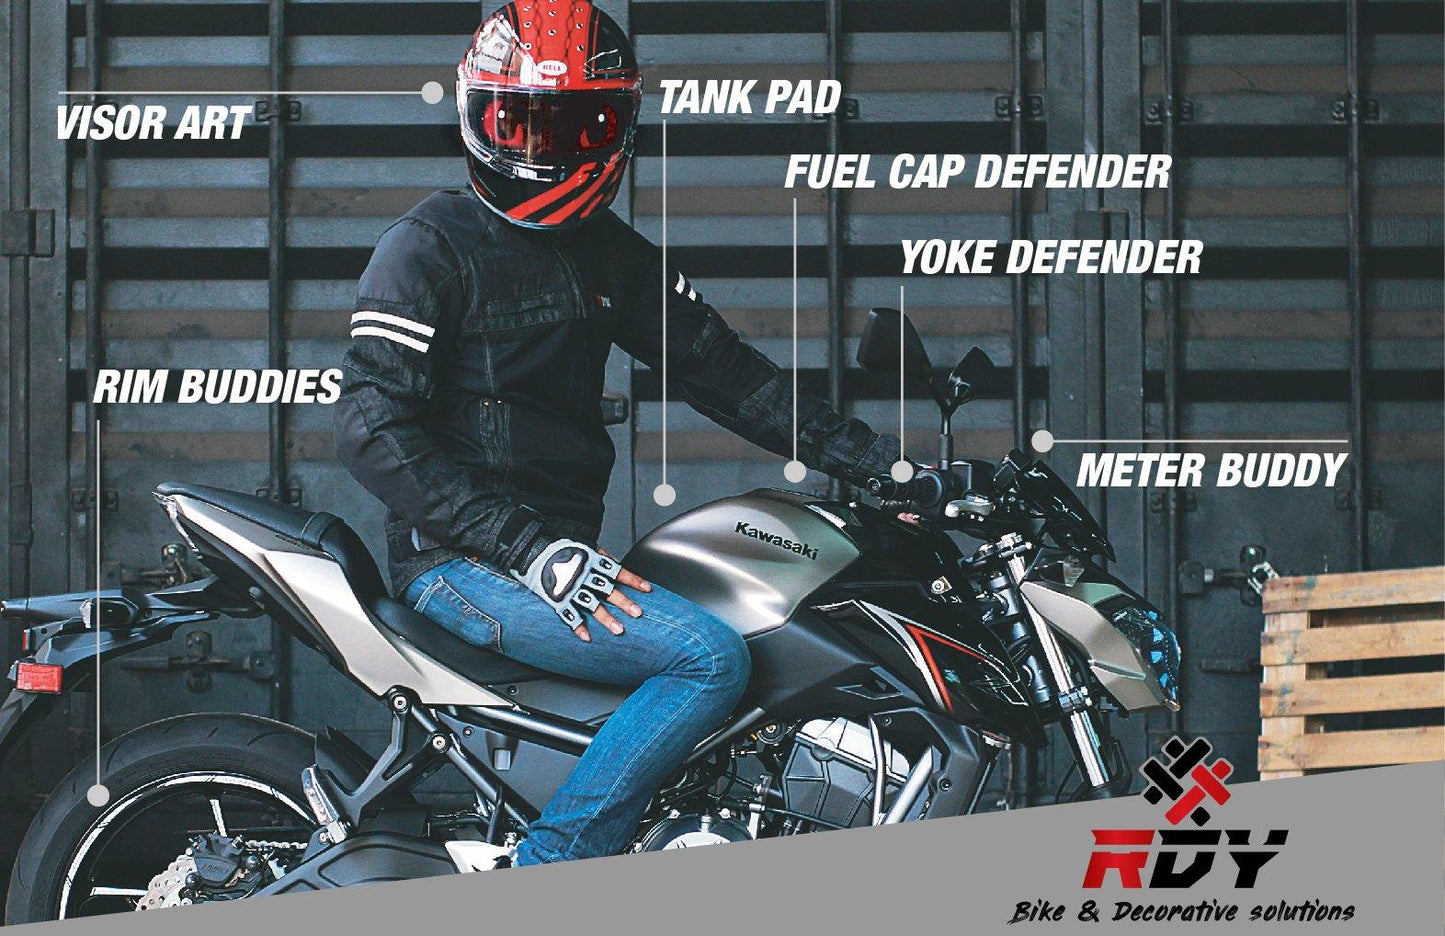 RDY Yoke Defender fits for Yamaha R1 ('15-'17) - Durian Bikers